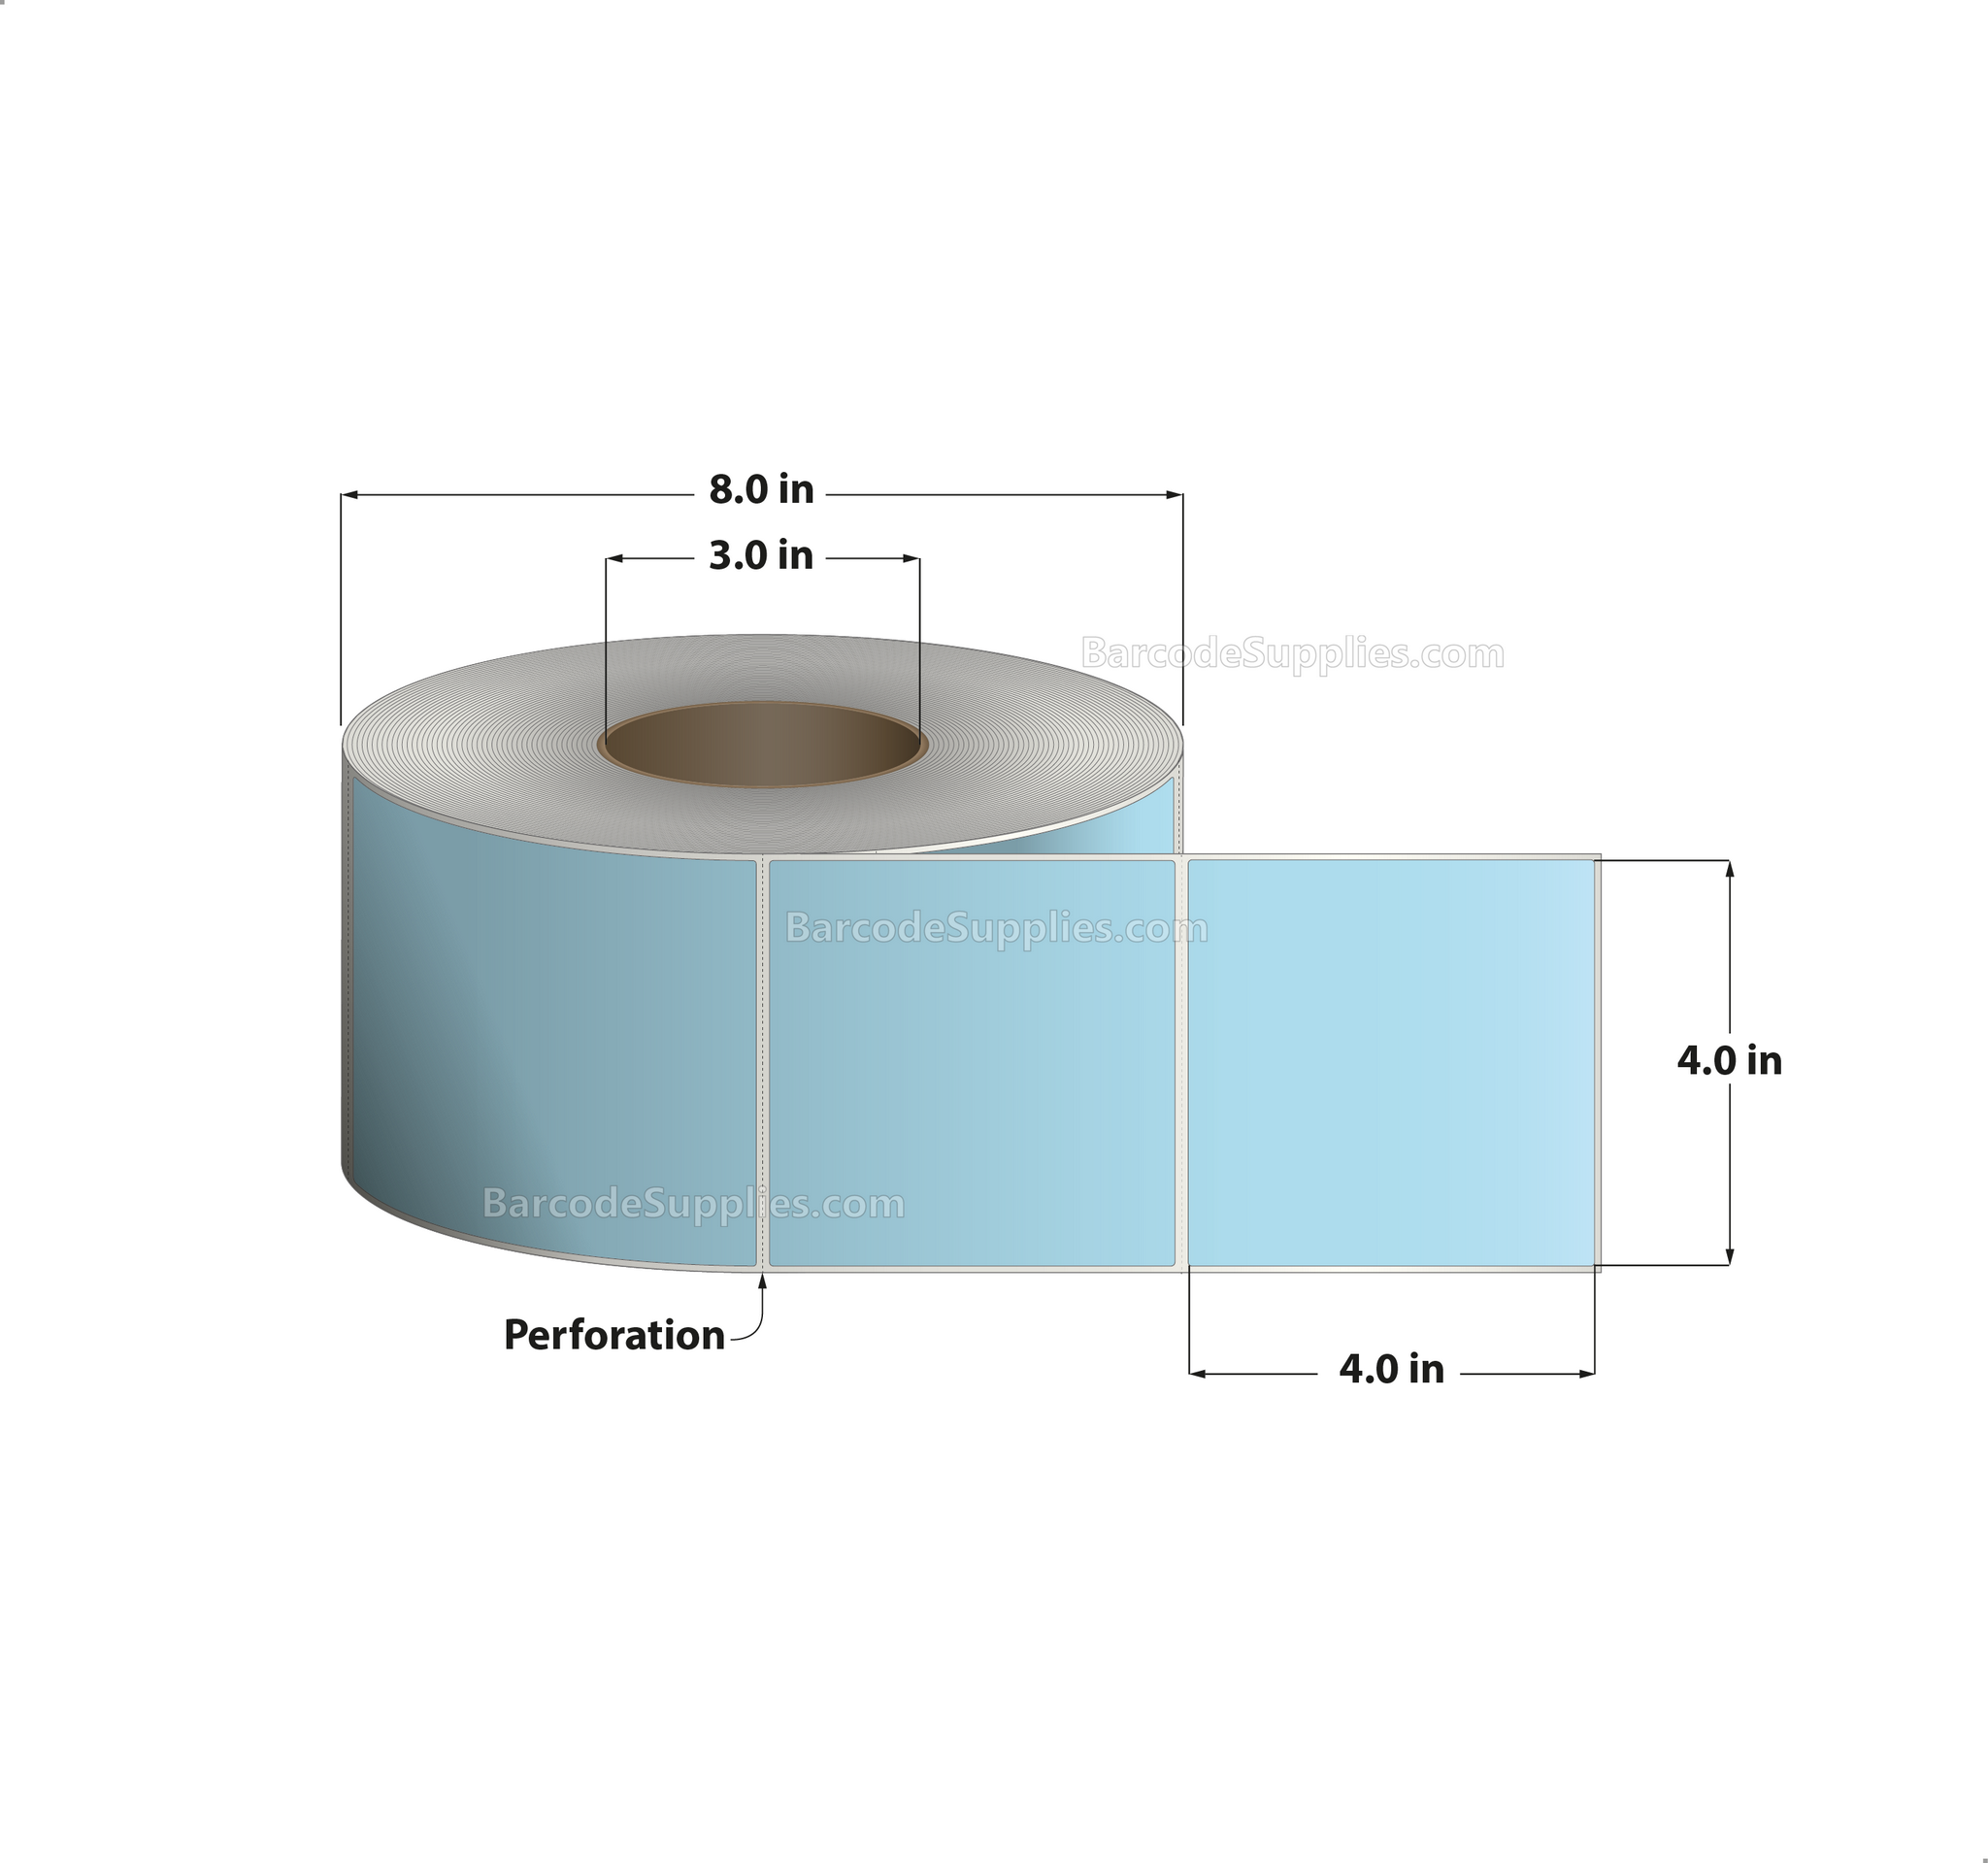 4 x 4 Thermal Transfer 2975 Blue Labels With Permanent Acrylic Adhesive - Perforated - 1500 Labels Per Roll - Carton Of 4 Rolls - 6000 Labels Total - MPN: TH44-1PBL